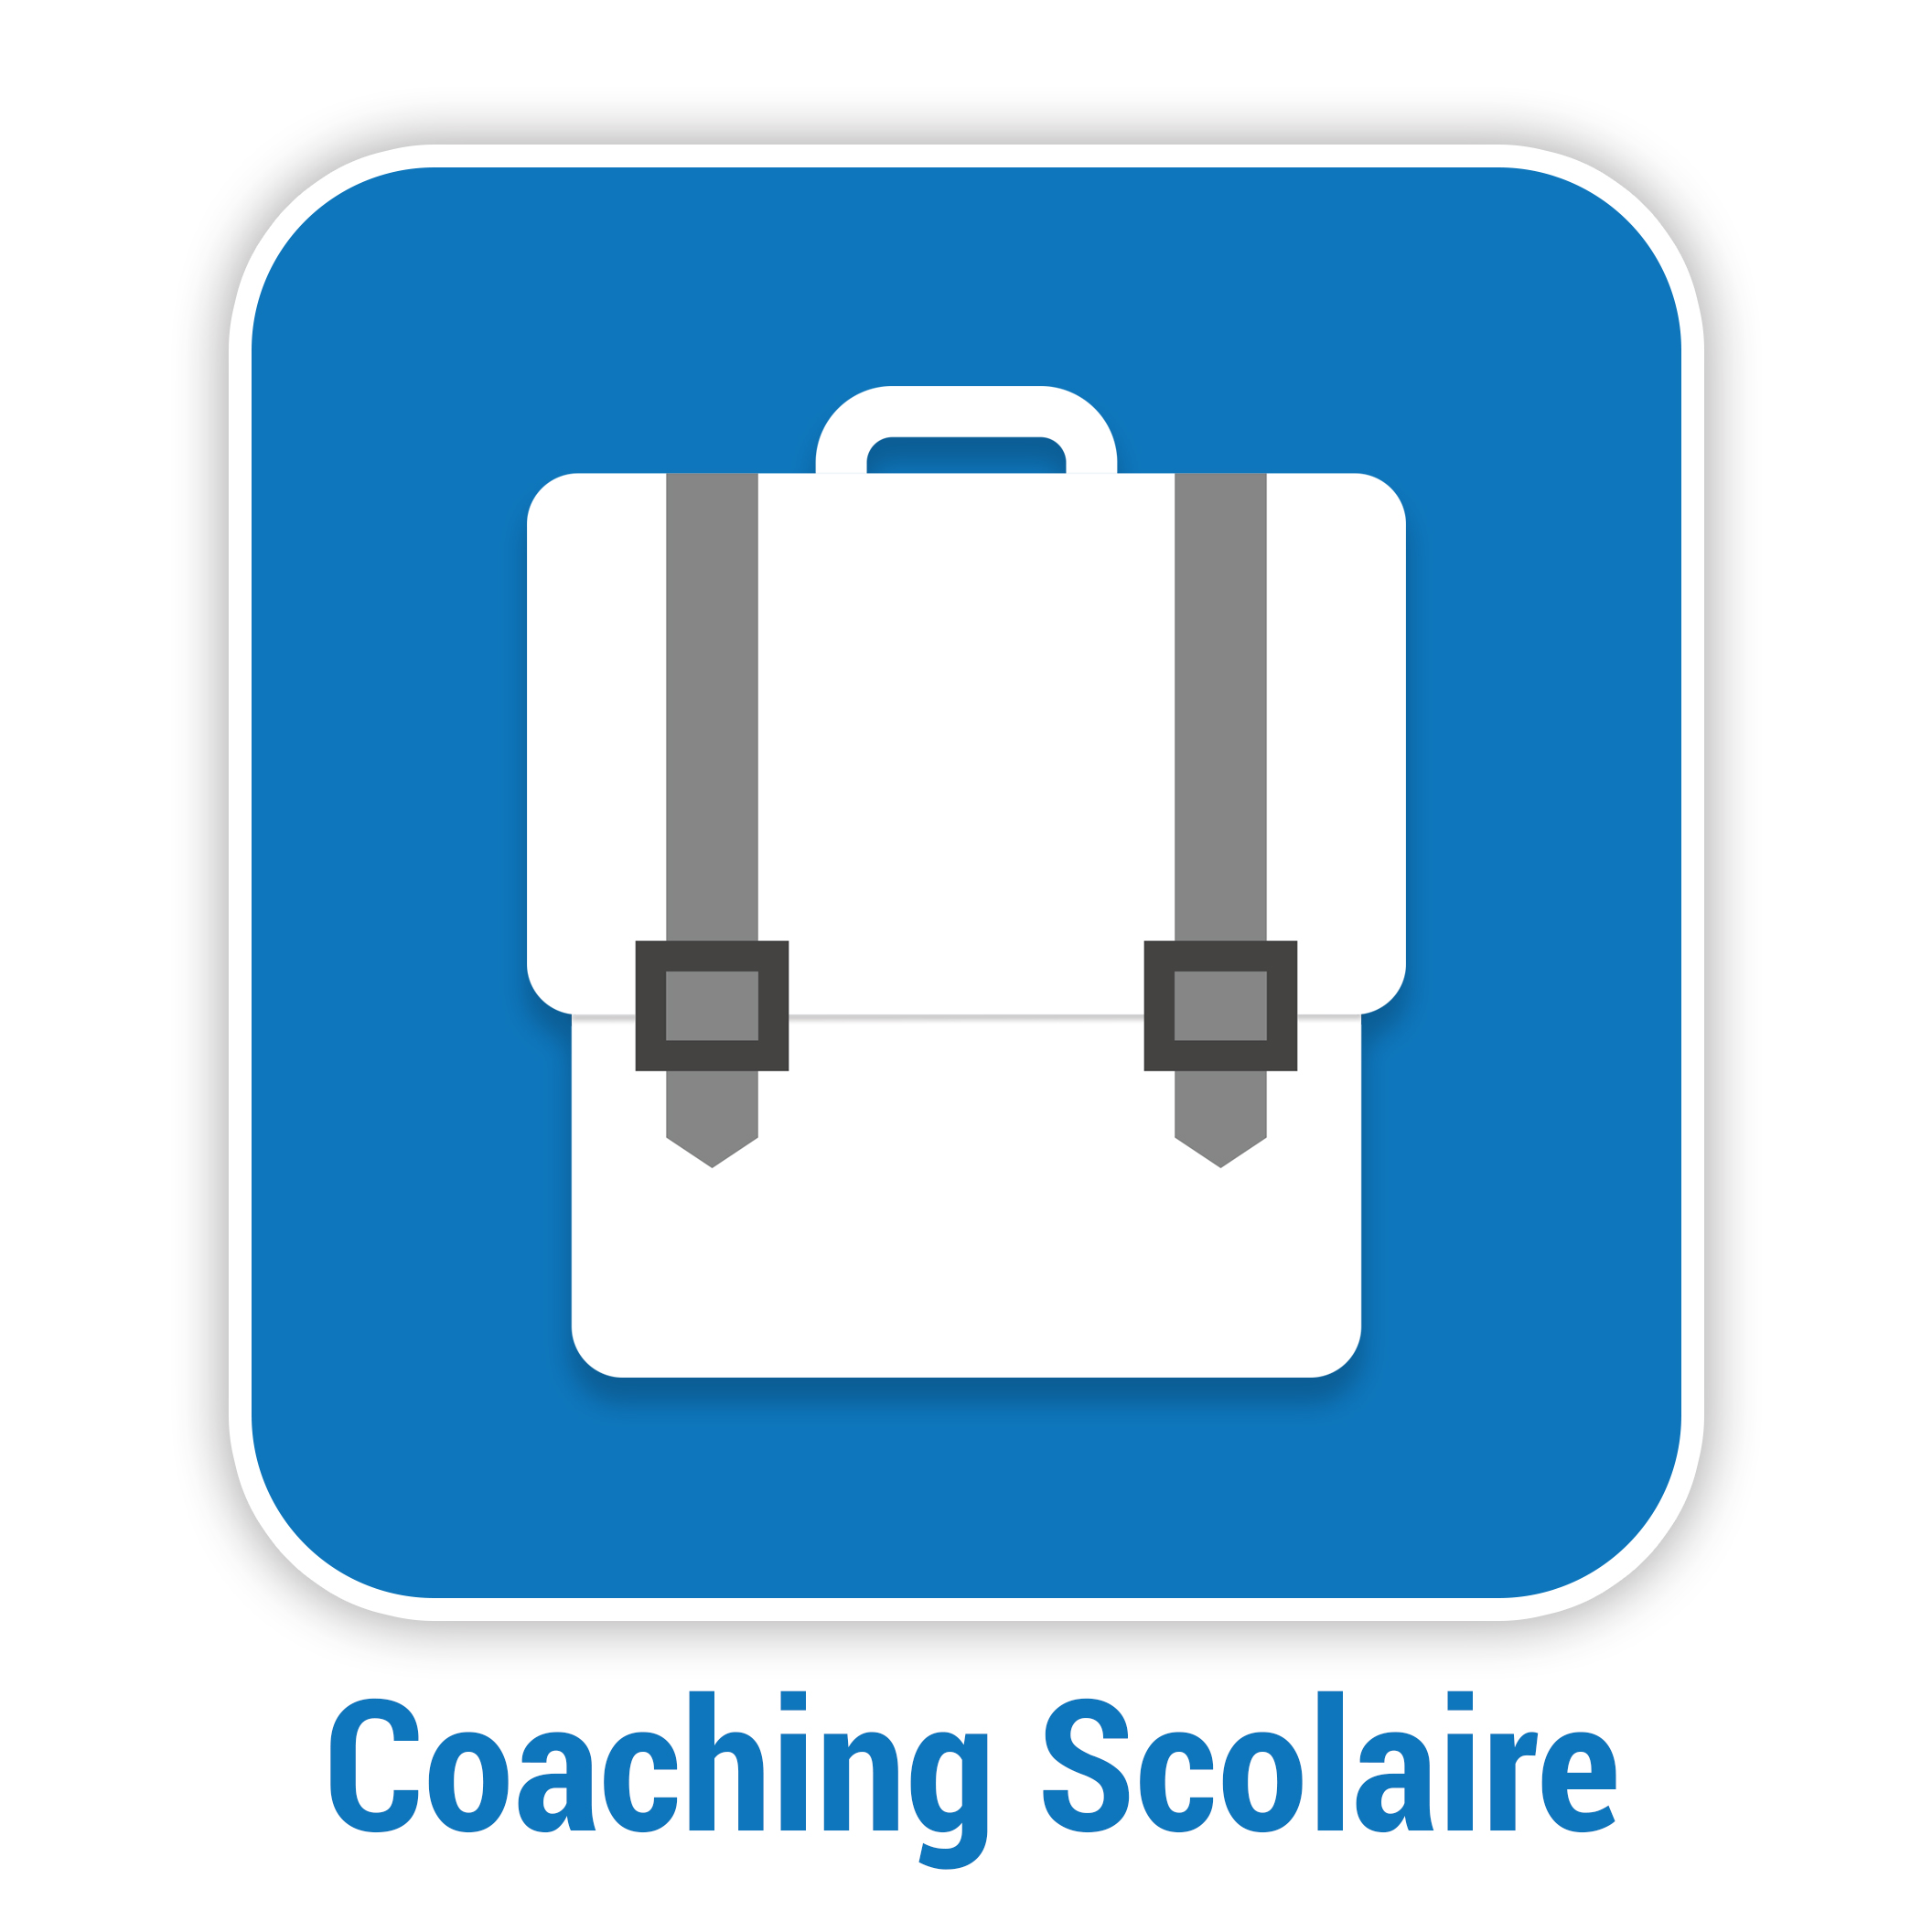 Coaching scolaire.